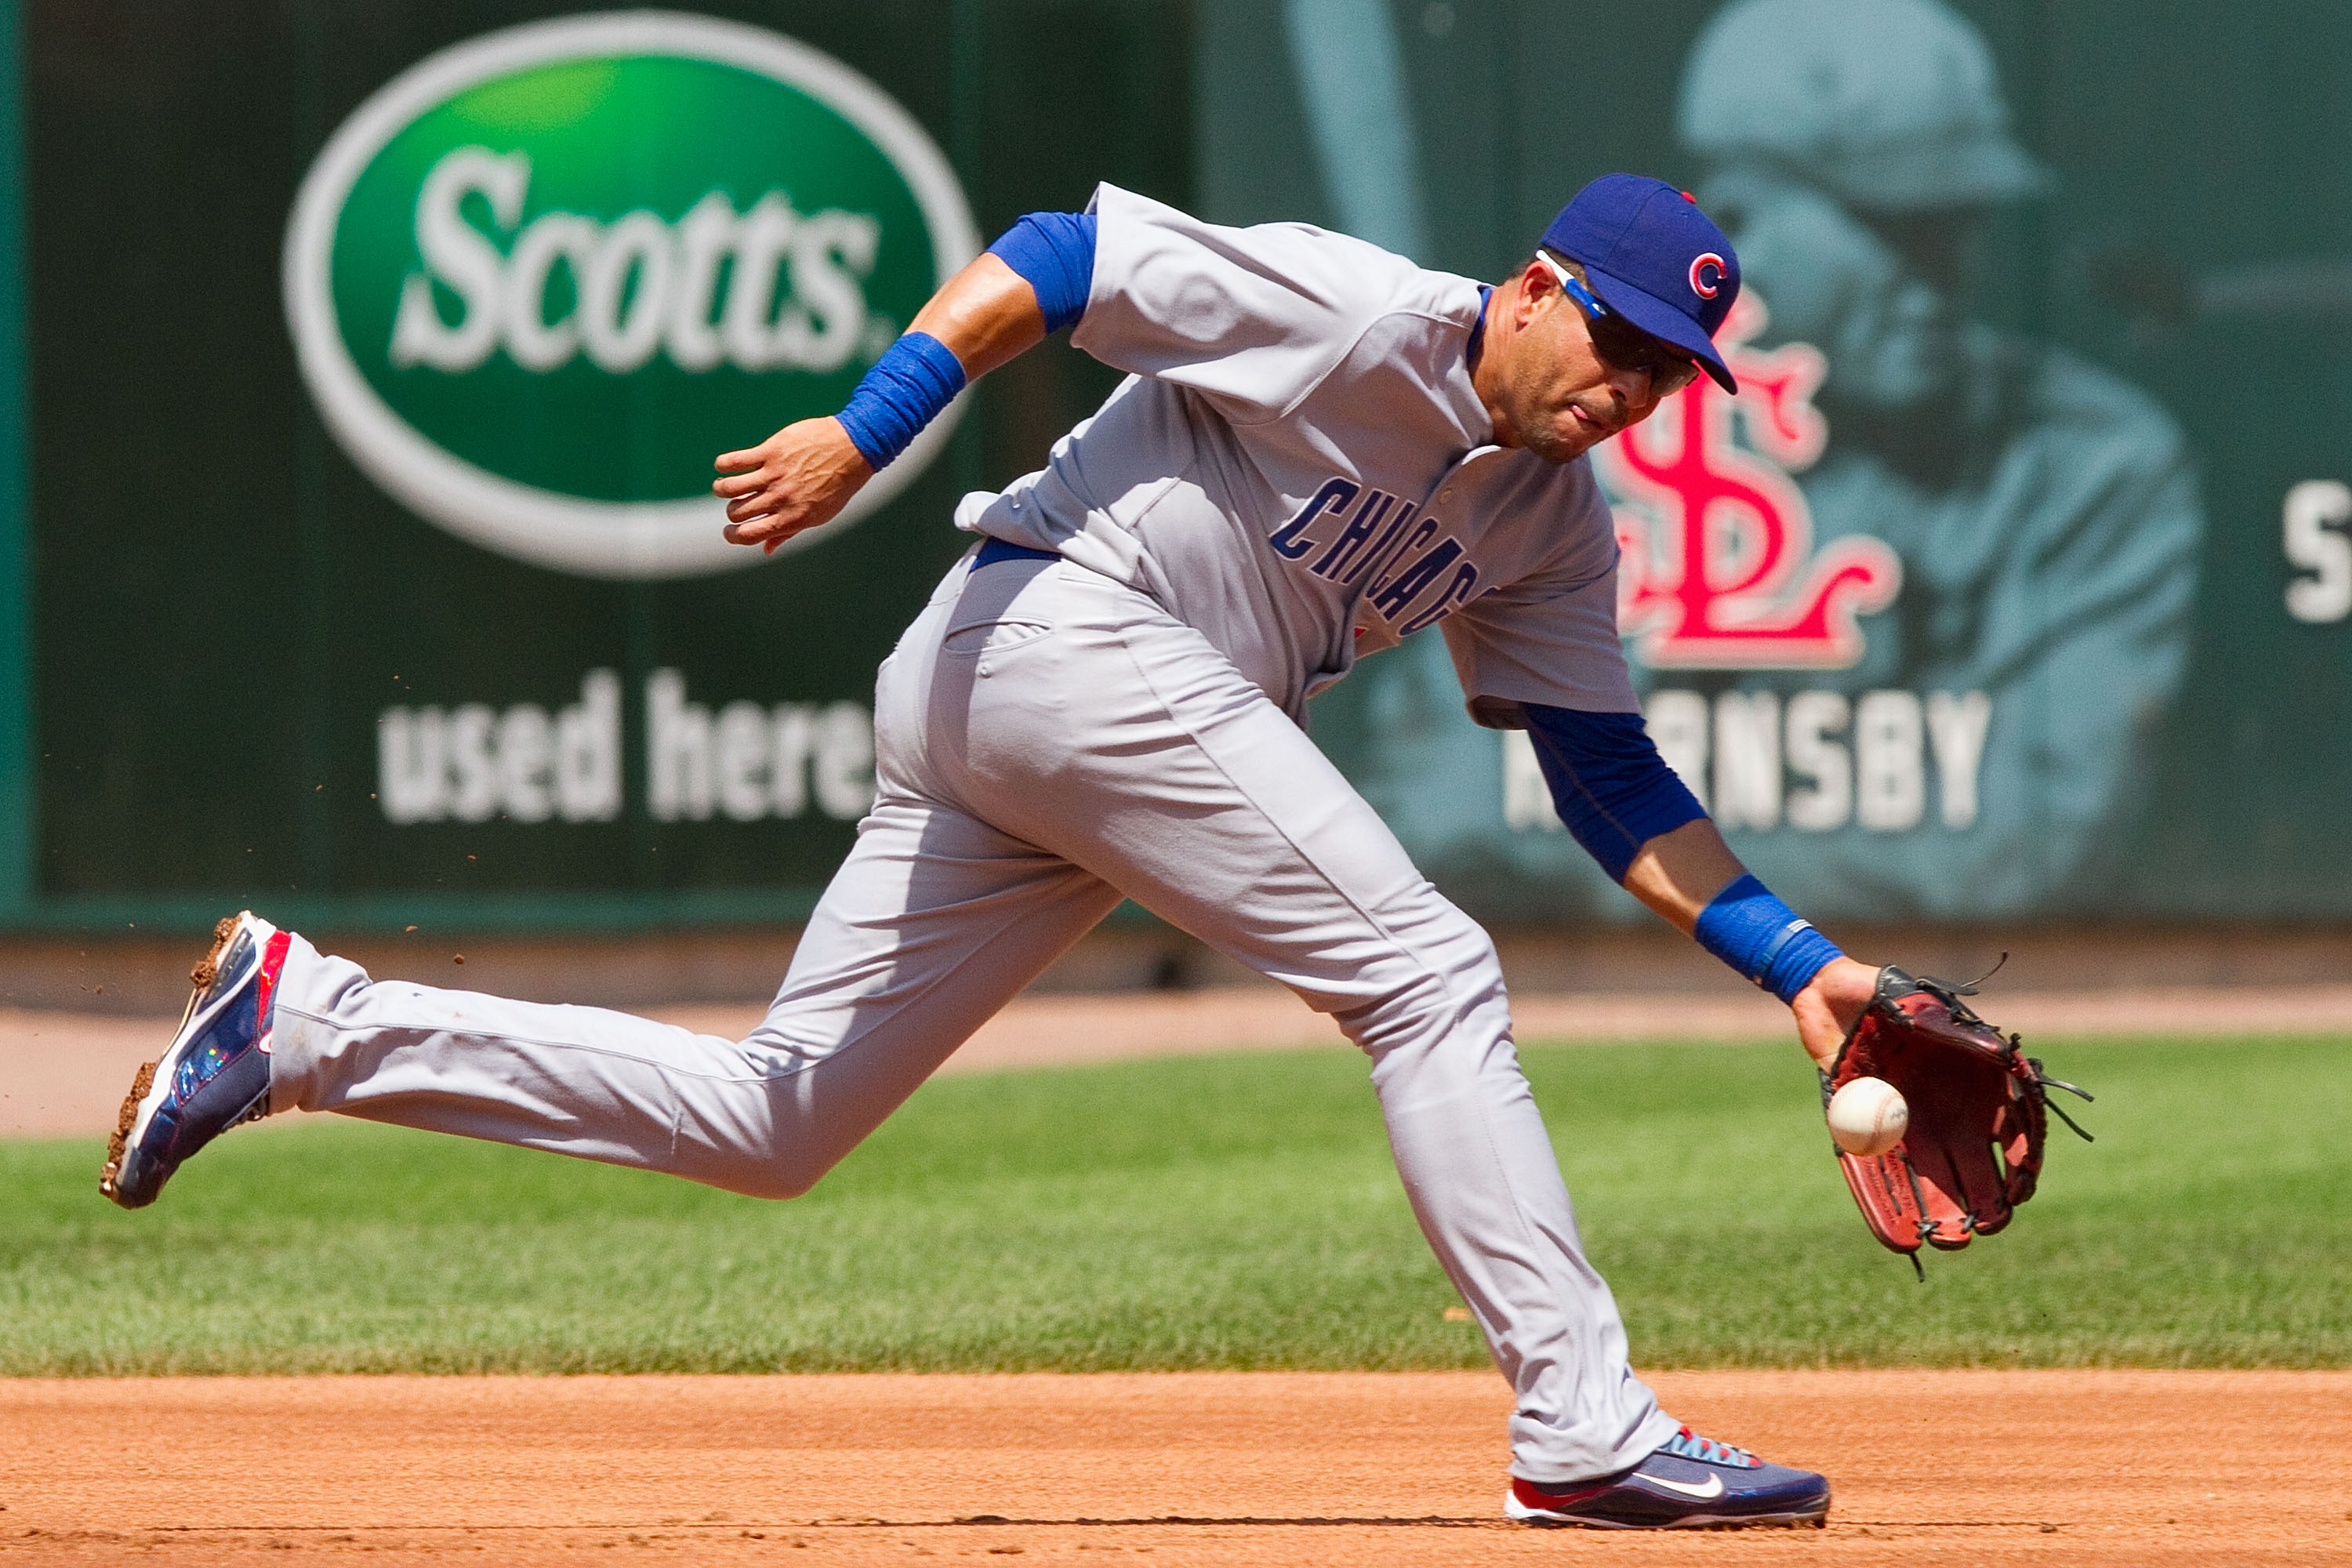 ST. LOUIS - AUGUST 15: Aramis Ramirez #16 of the Chicago Cubs fields a ground ball against the St. Louis Cardinals at Busch Stadium on August 15, 2010 in St. Louis, Missouri.  The Cubs beat the Cardinals 9-7.  (Photo by Dilip Vishwanat/Getty Images)